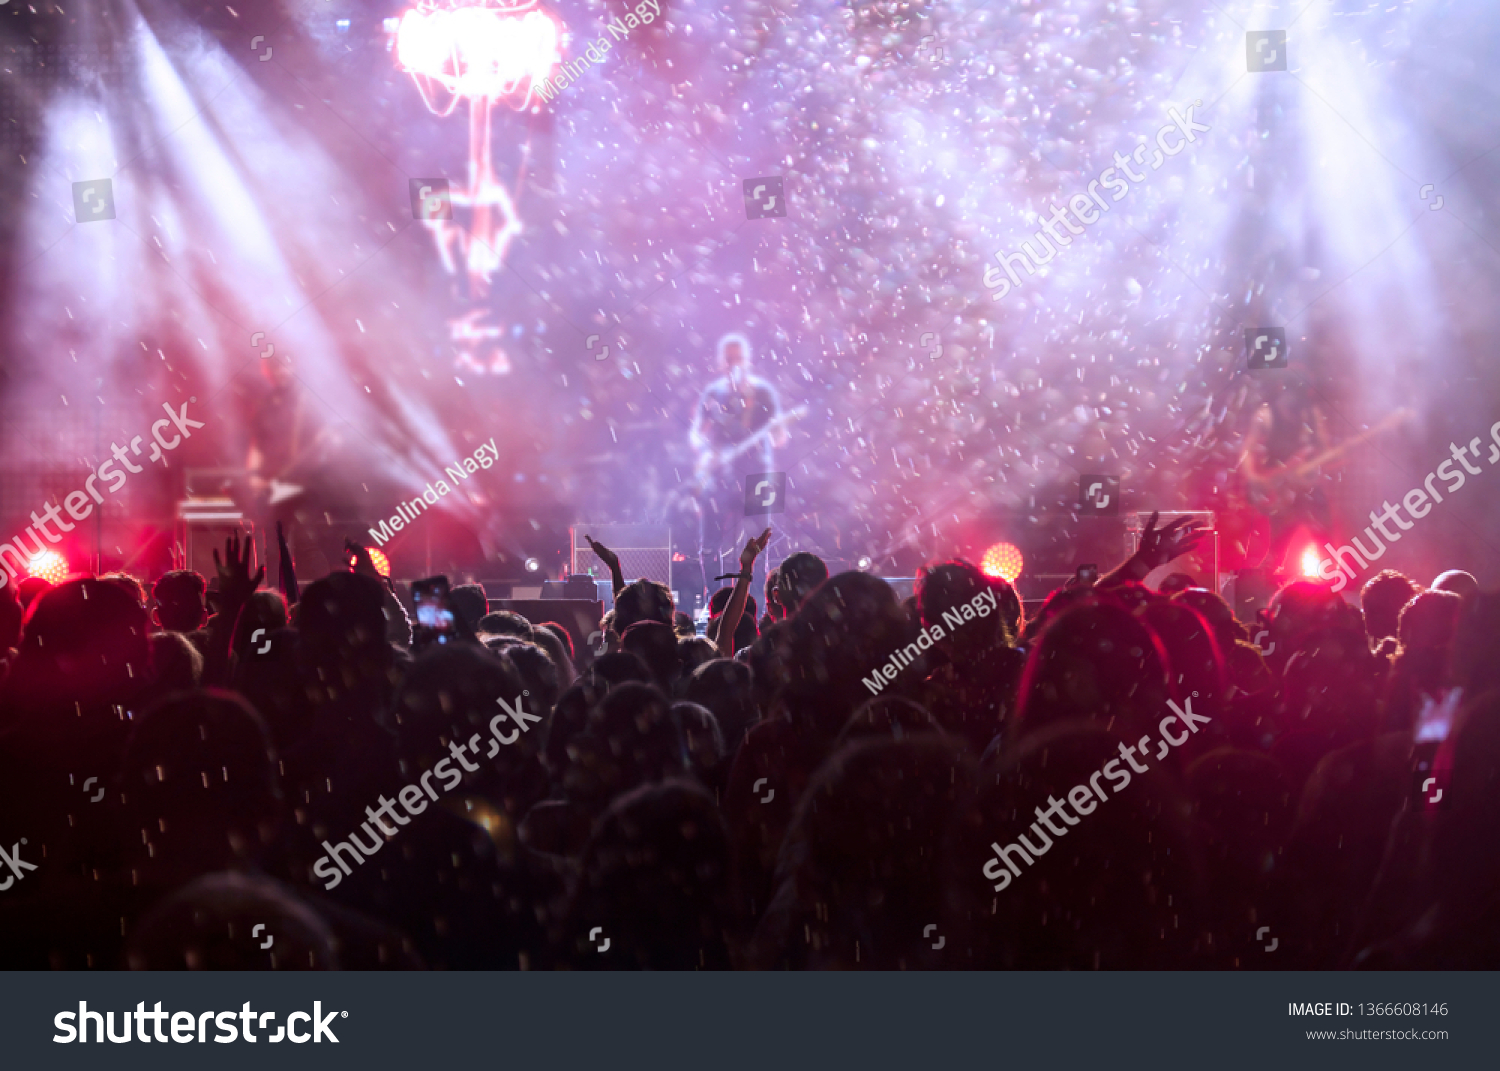 Crowd at concert - Cheering crowd in bright colorful stage lights #1366608146